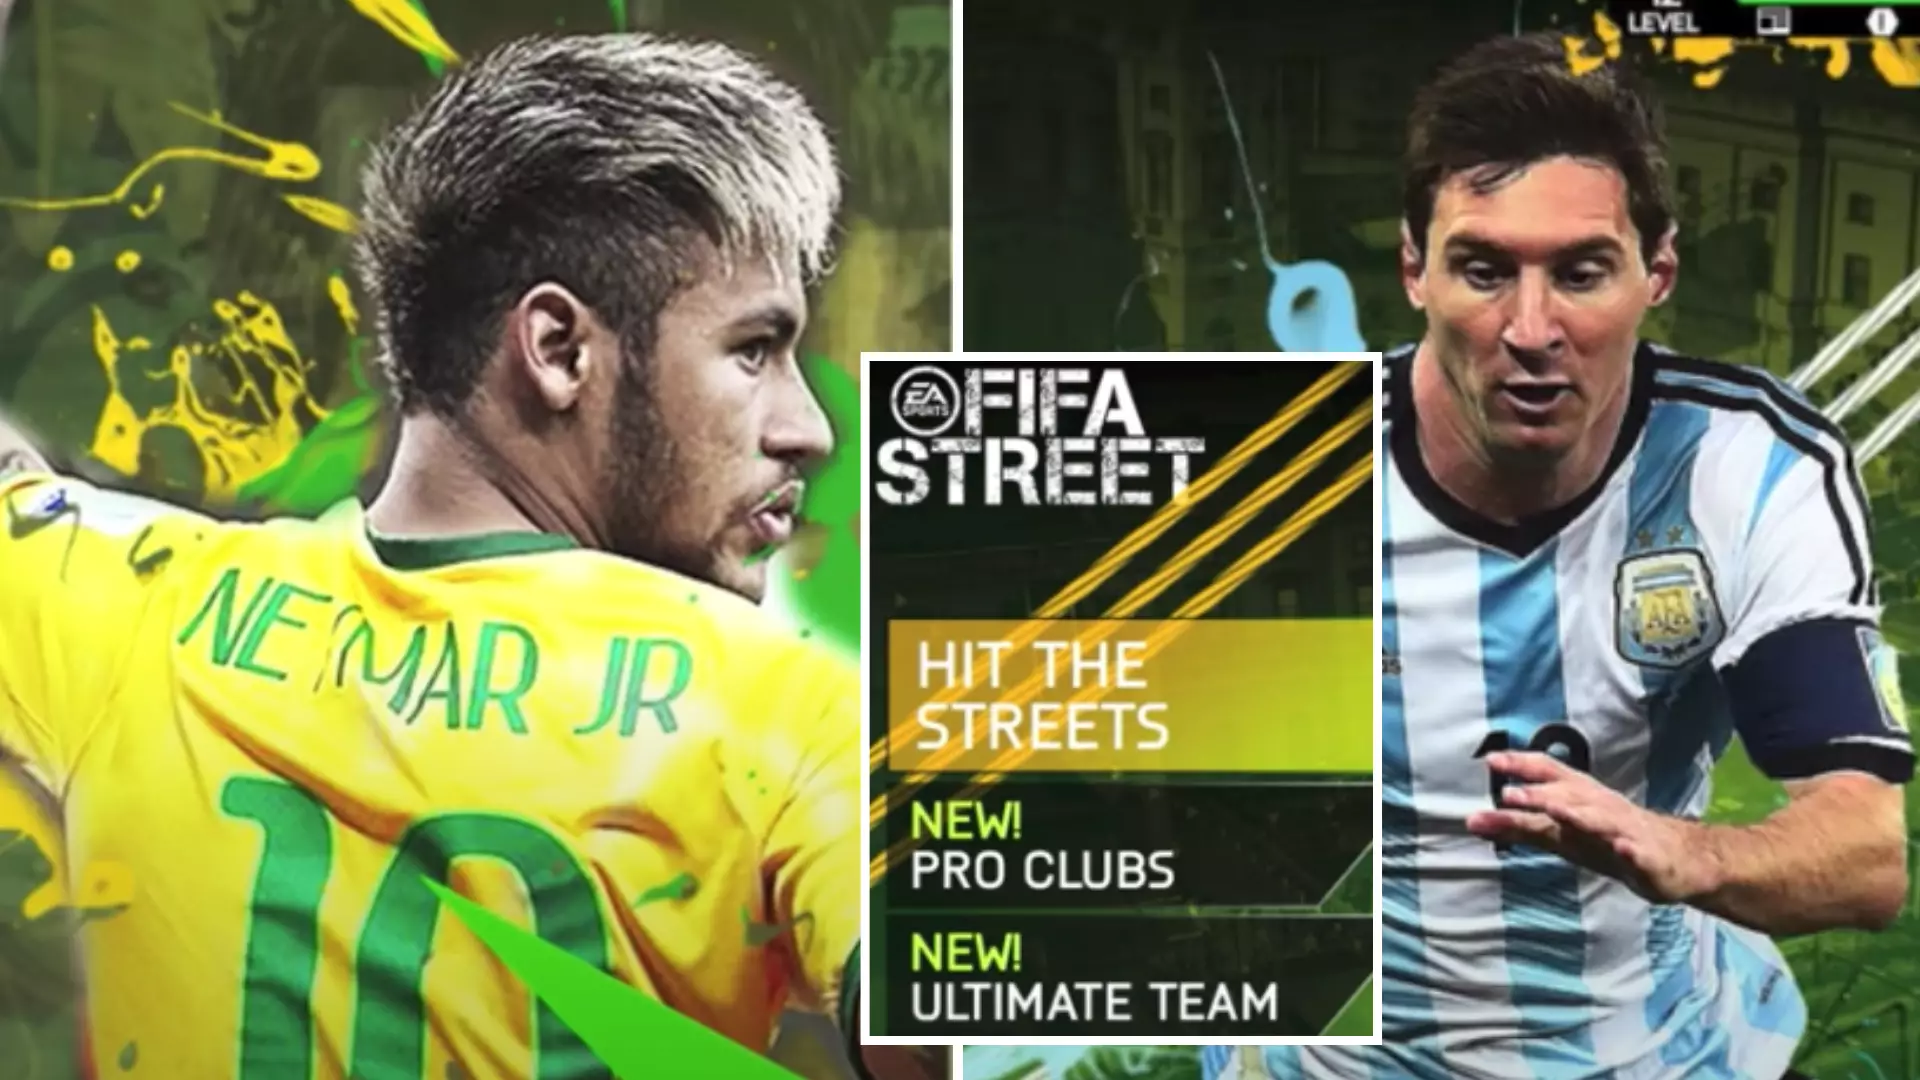 Fan’s FIFA Street 5 Concept Is Genius And The Sequel We Need Right Now